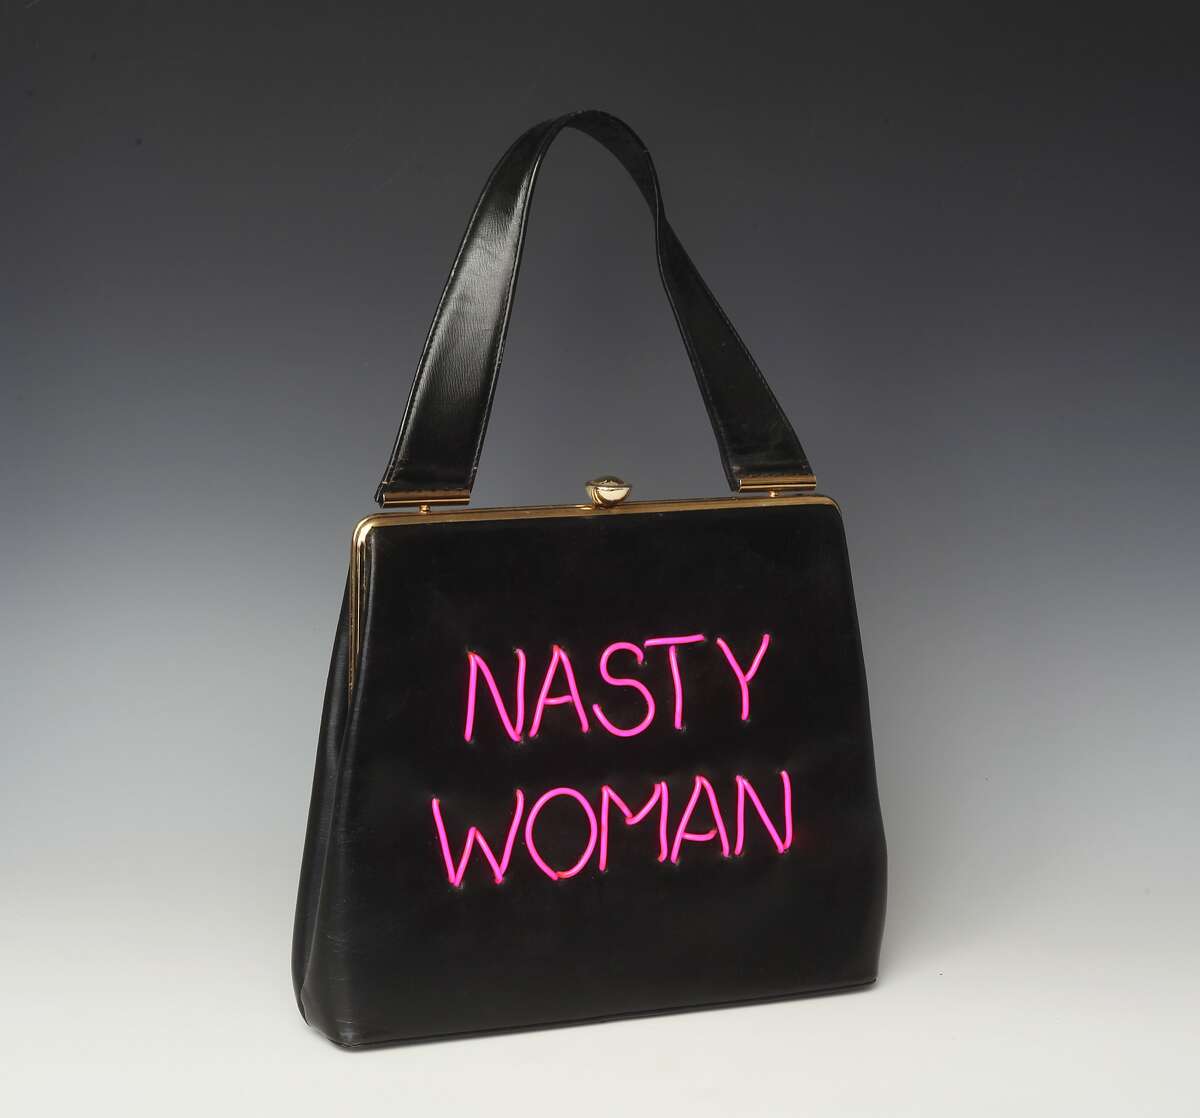 Michele Pred, a Berkeley artist, is making political statements with her Power of the Purse, a series of vintage handbags that incorporate meaningful, timely political messages. �Nasty Woman,� �Me Too,� and �My Body, My Business� are some of the phrases created using electroluminescent wire that are sewed on the purses. The series is limited edition, with only 10 made with each message.